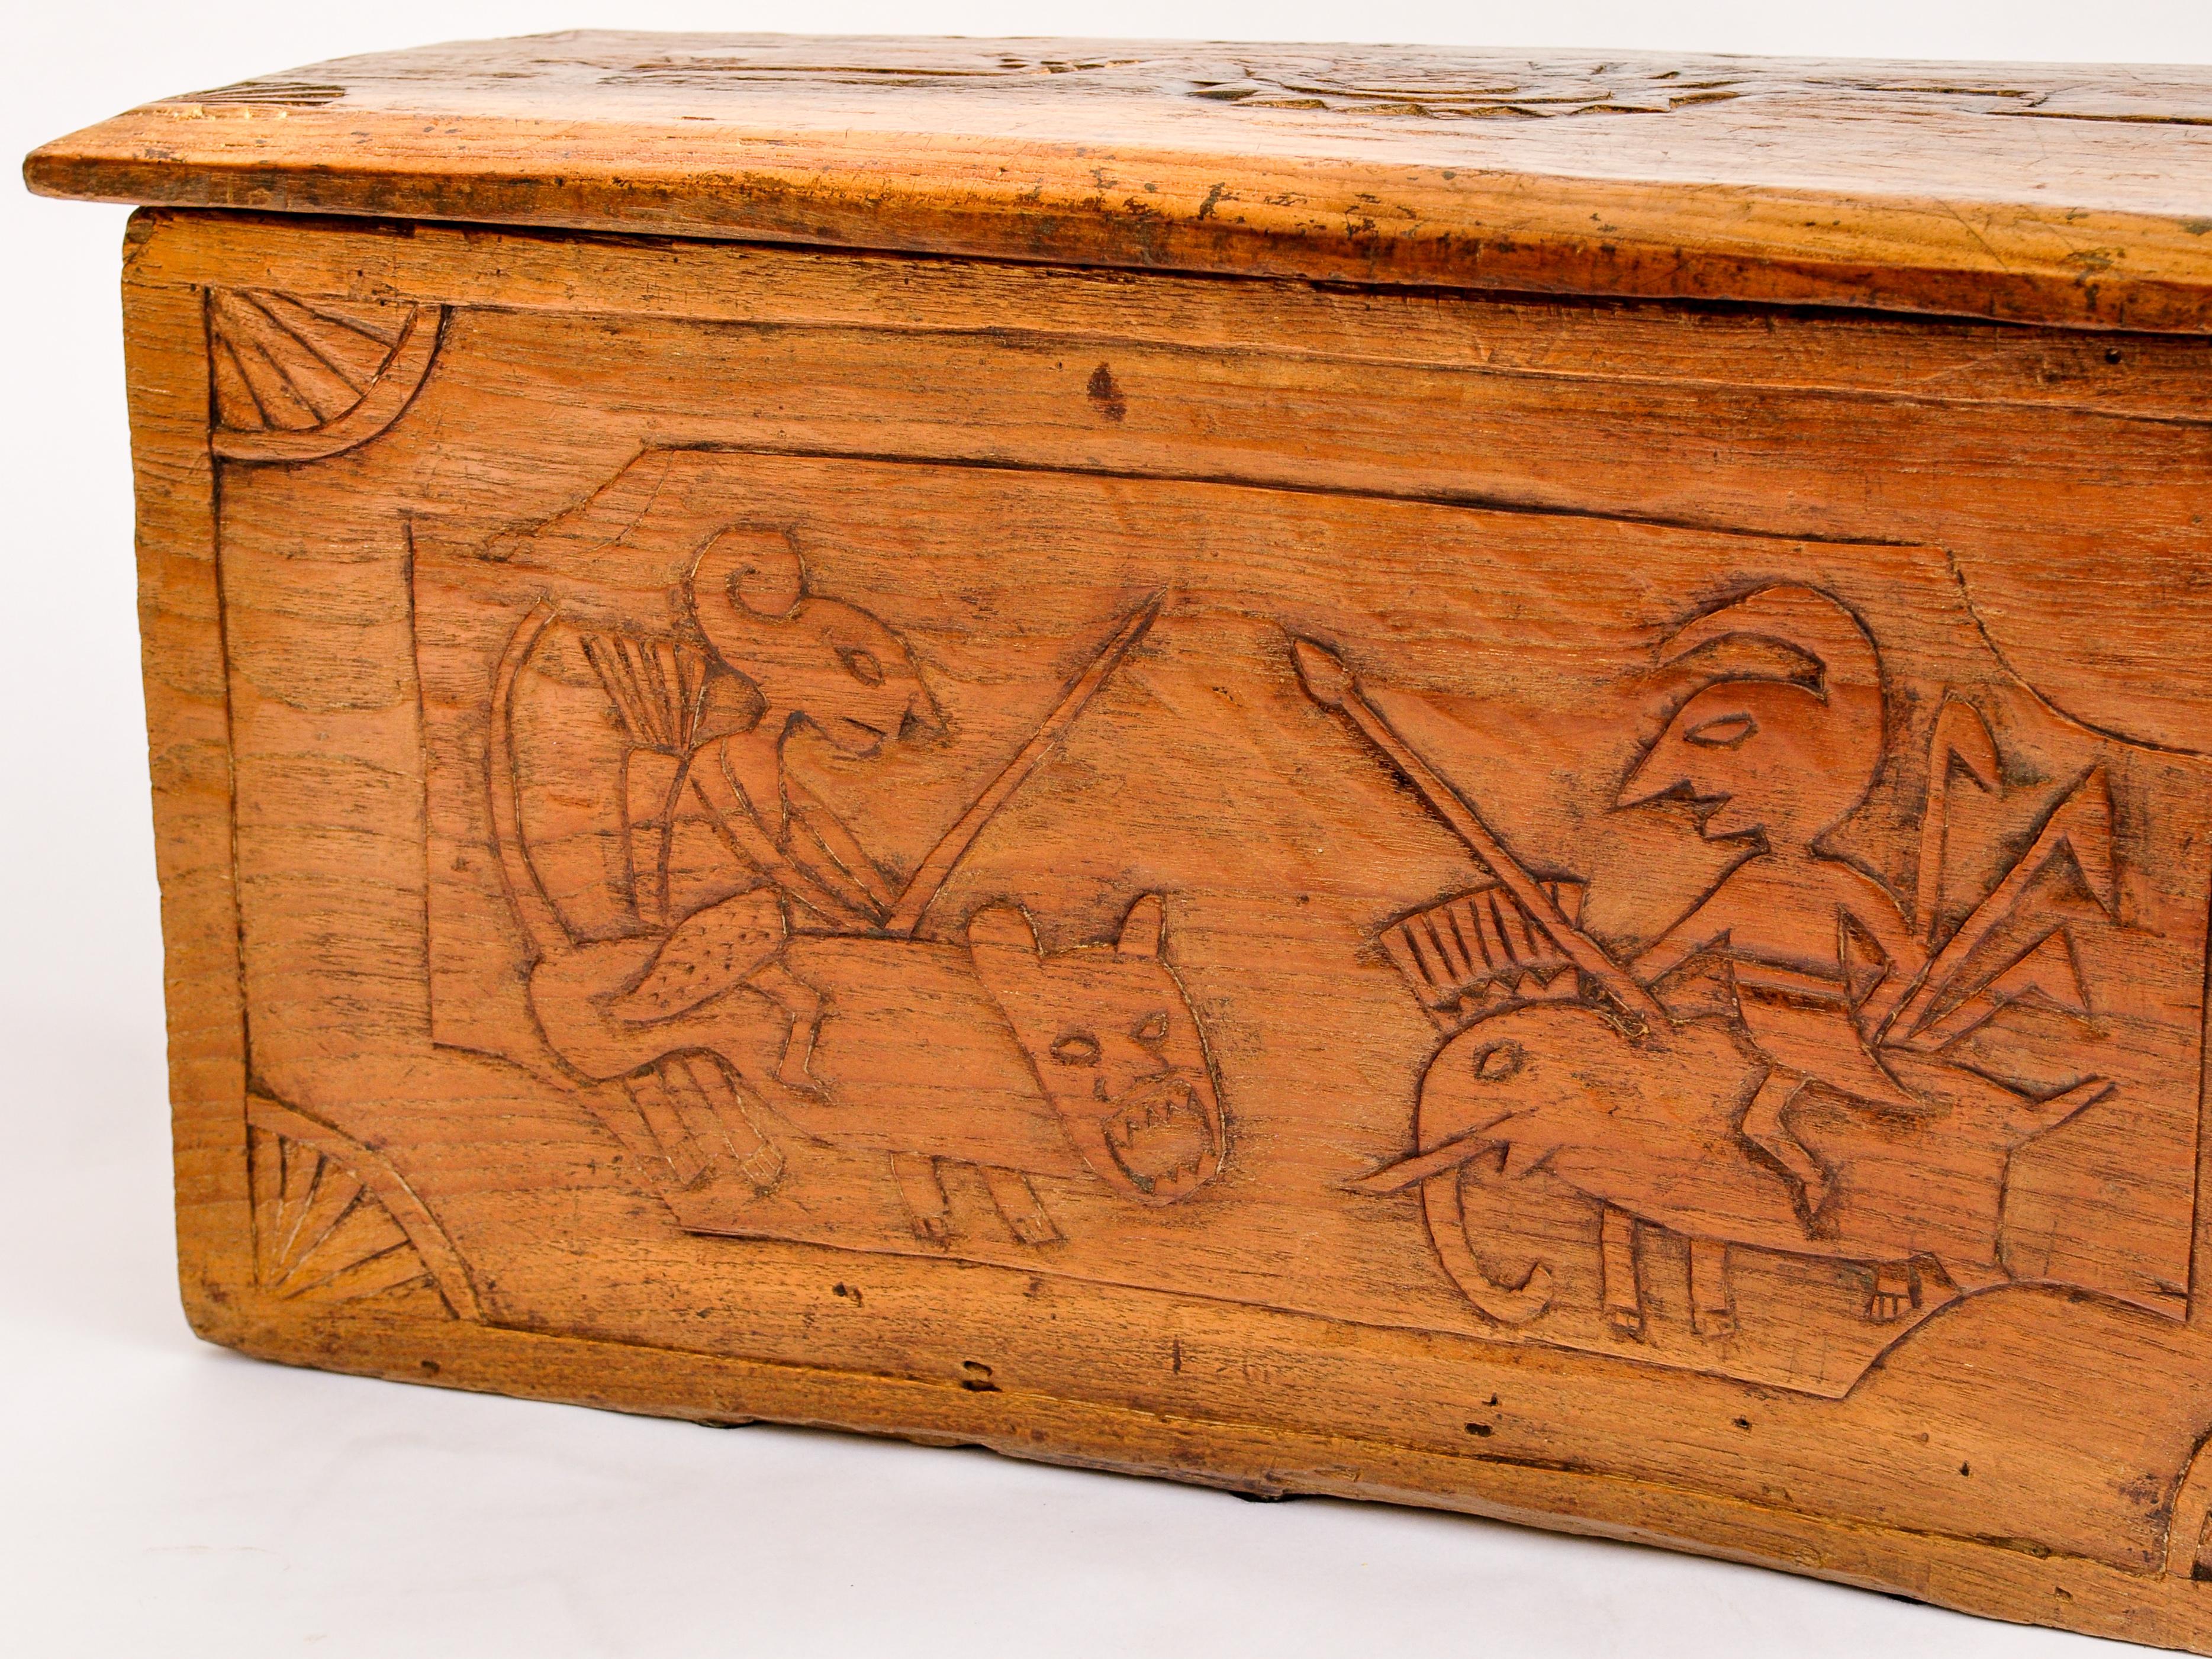 Hand-Crafted Vintage Solid Teak Storage Box with Carvings, Java, Early to Mid-20th Century